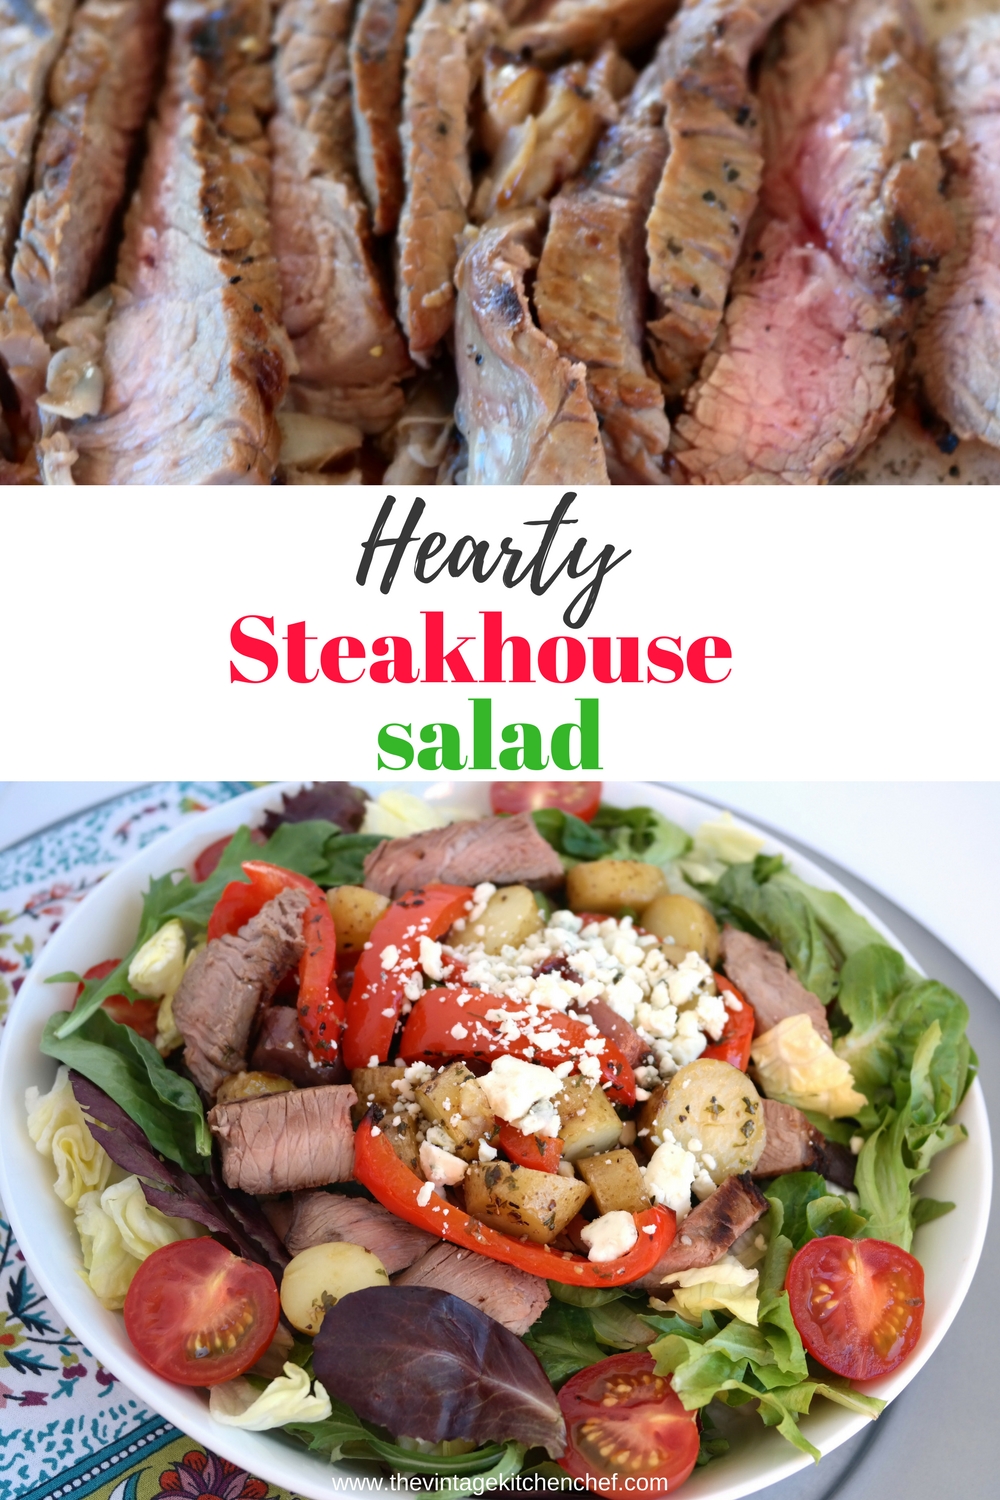 Hearty Steakhouse Salad is a real meat and potatoes meal! This yummy salad has all the flavors of your favorite steakhouse meal.